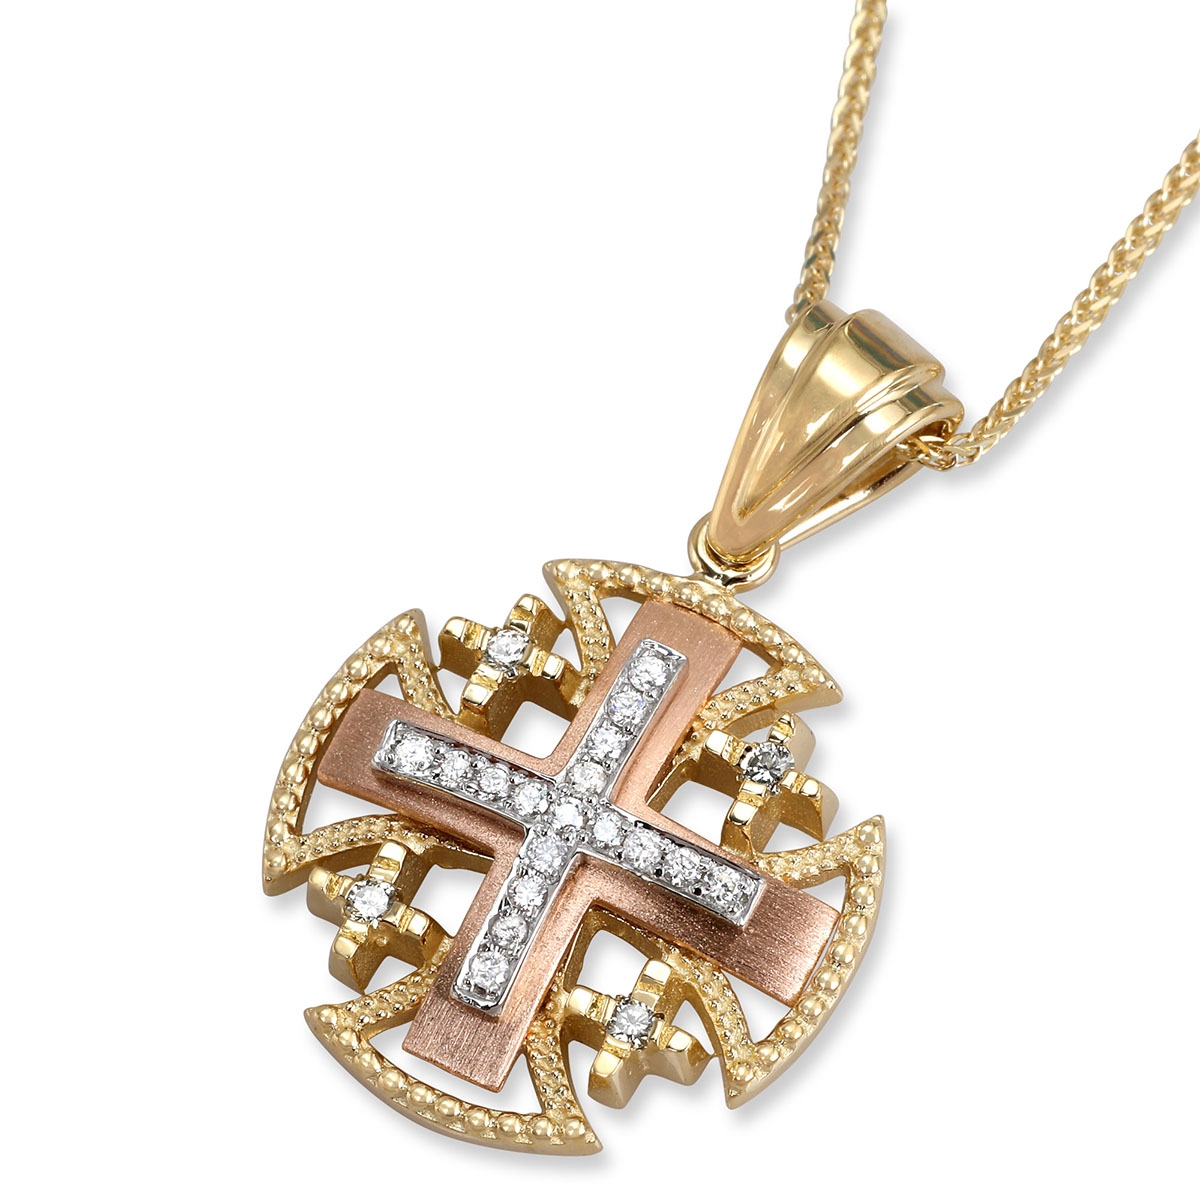 Anbinder Tricolor 14K Yellow, White, and Rose Gold Splayed Jerusalem Cross Pendant with Milgrain Design and Diamonds - 1